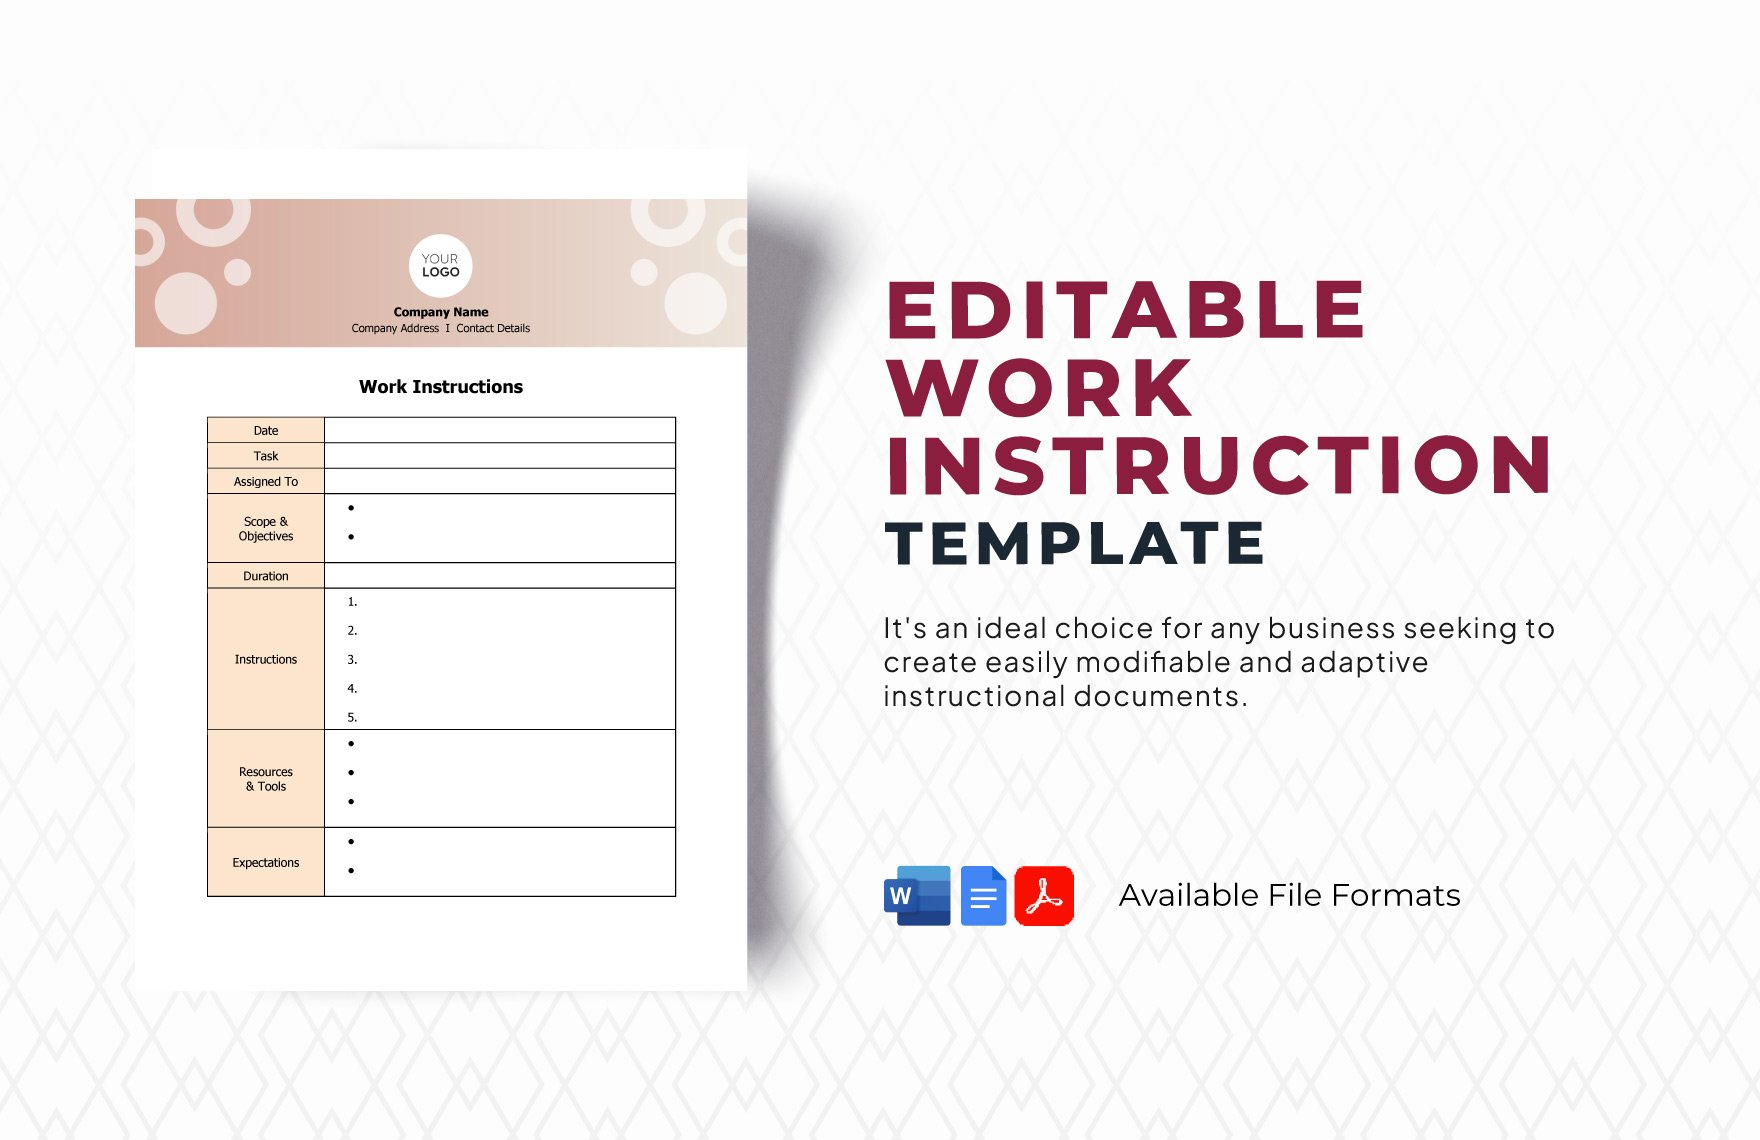 Free Editable Work Instruction Template in Word, Google Docs, PDF